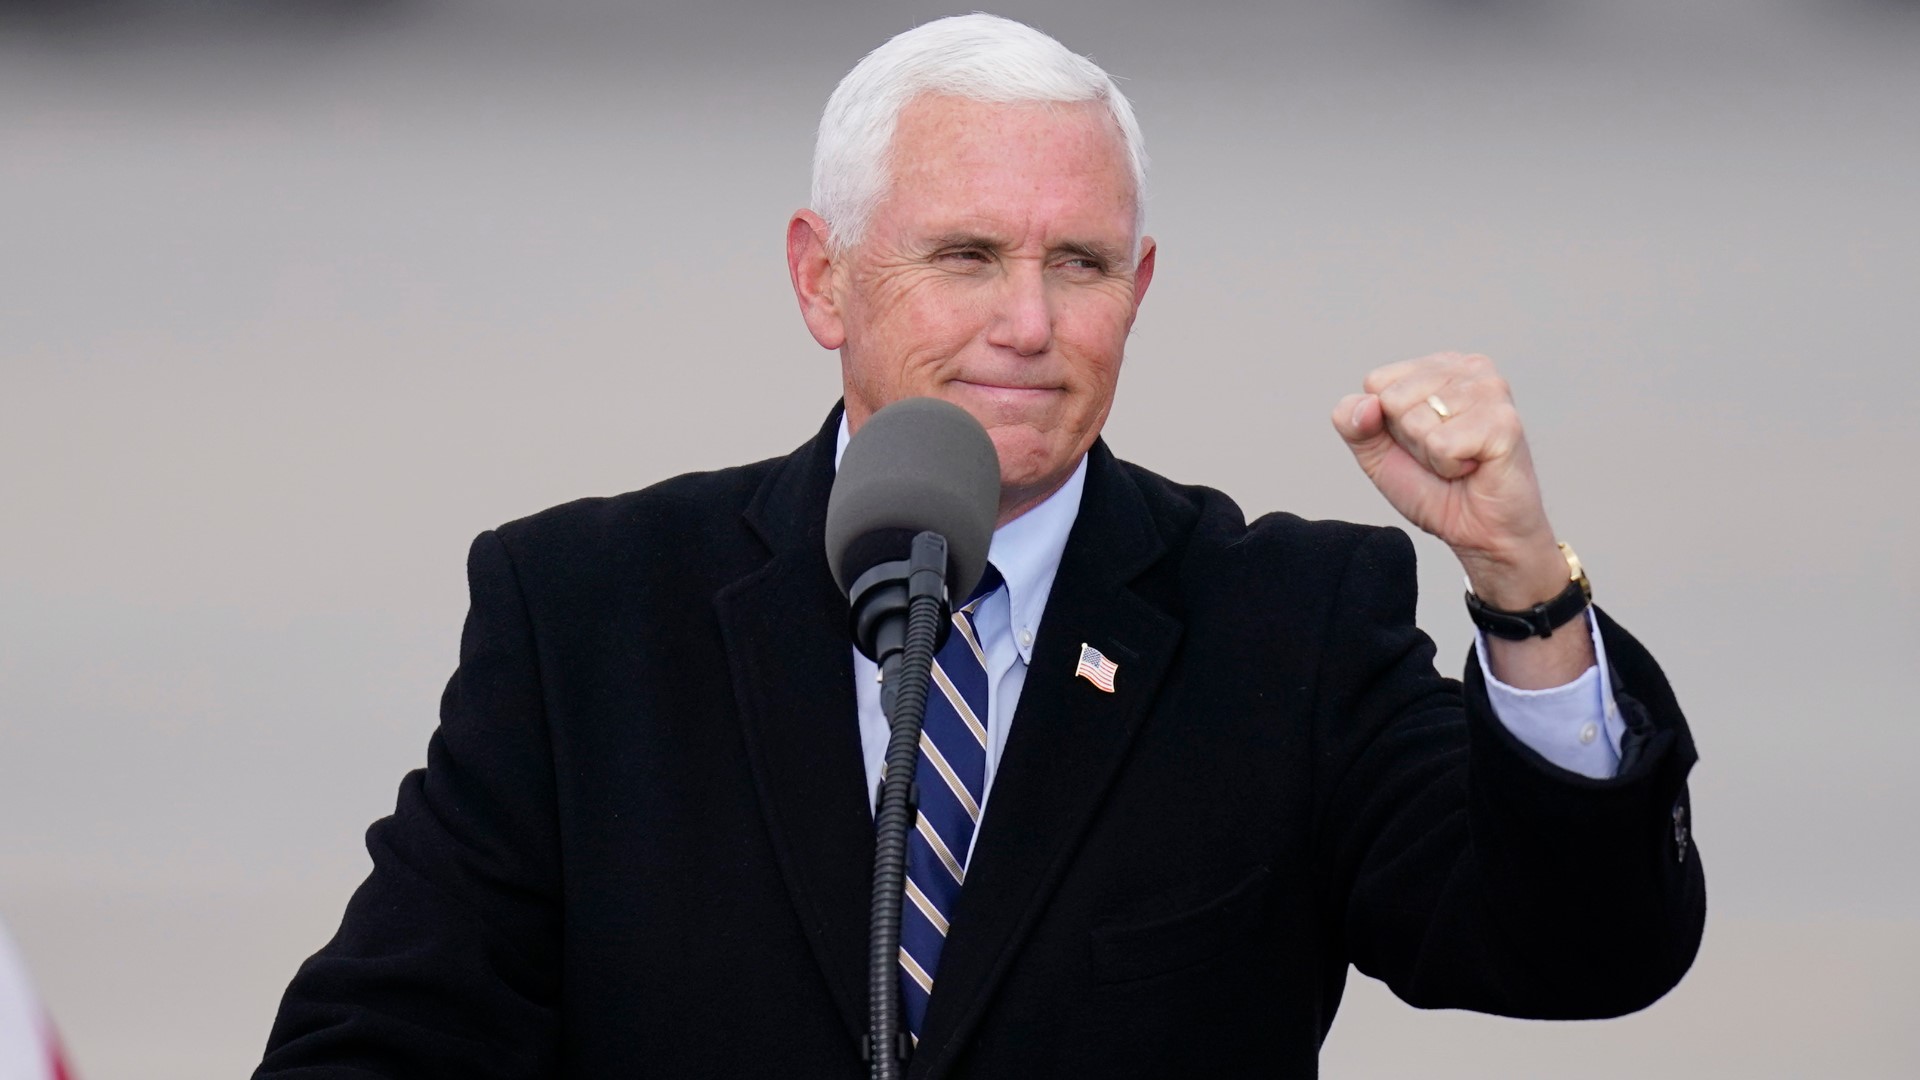 This is Pence's second visit in just over a month. He held a rally in Cedar Rapids in February, where he spoke about parental rights.